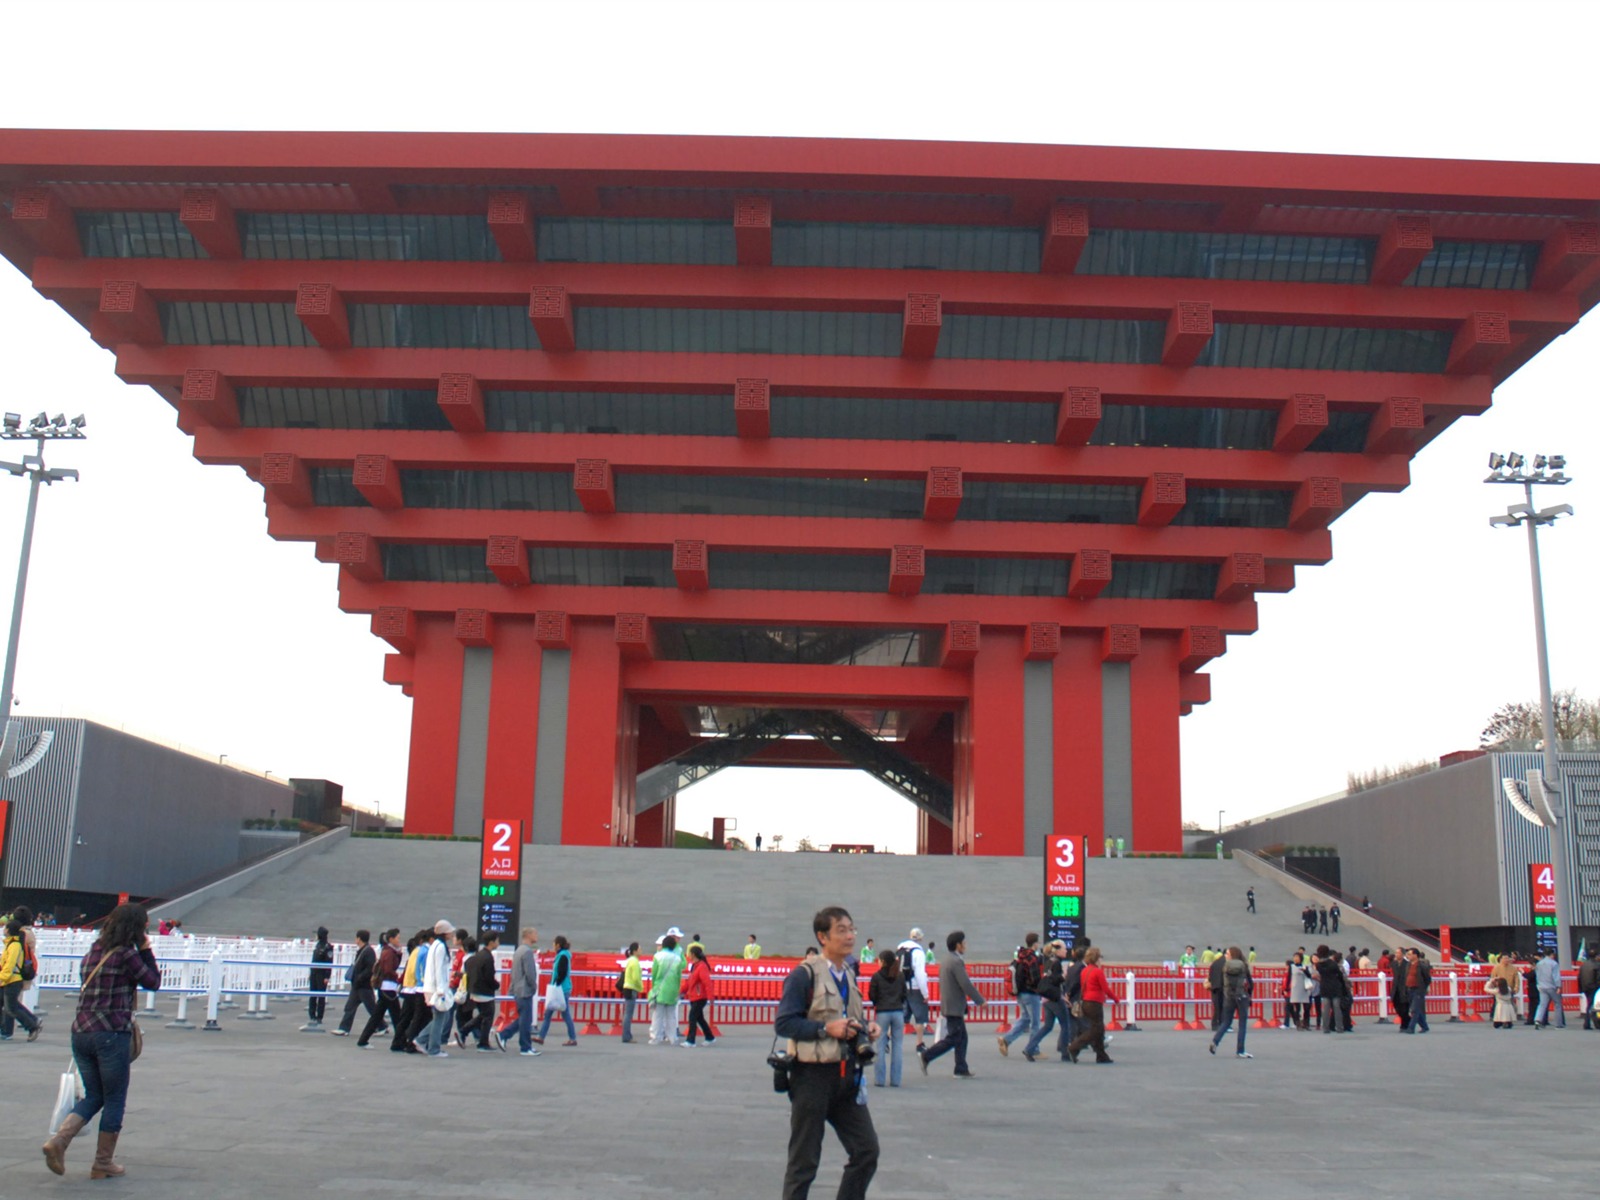 Commissioning of the 2010 Shanghai World Expo (studious works) #26 - 1600x1200